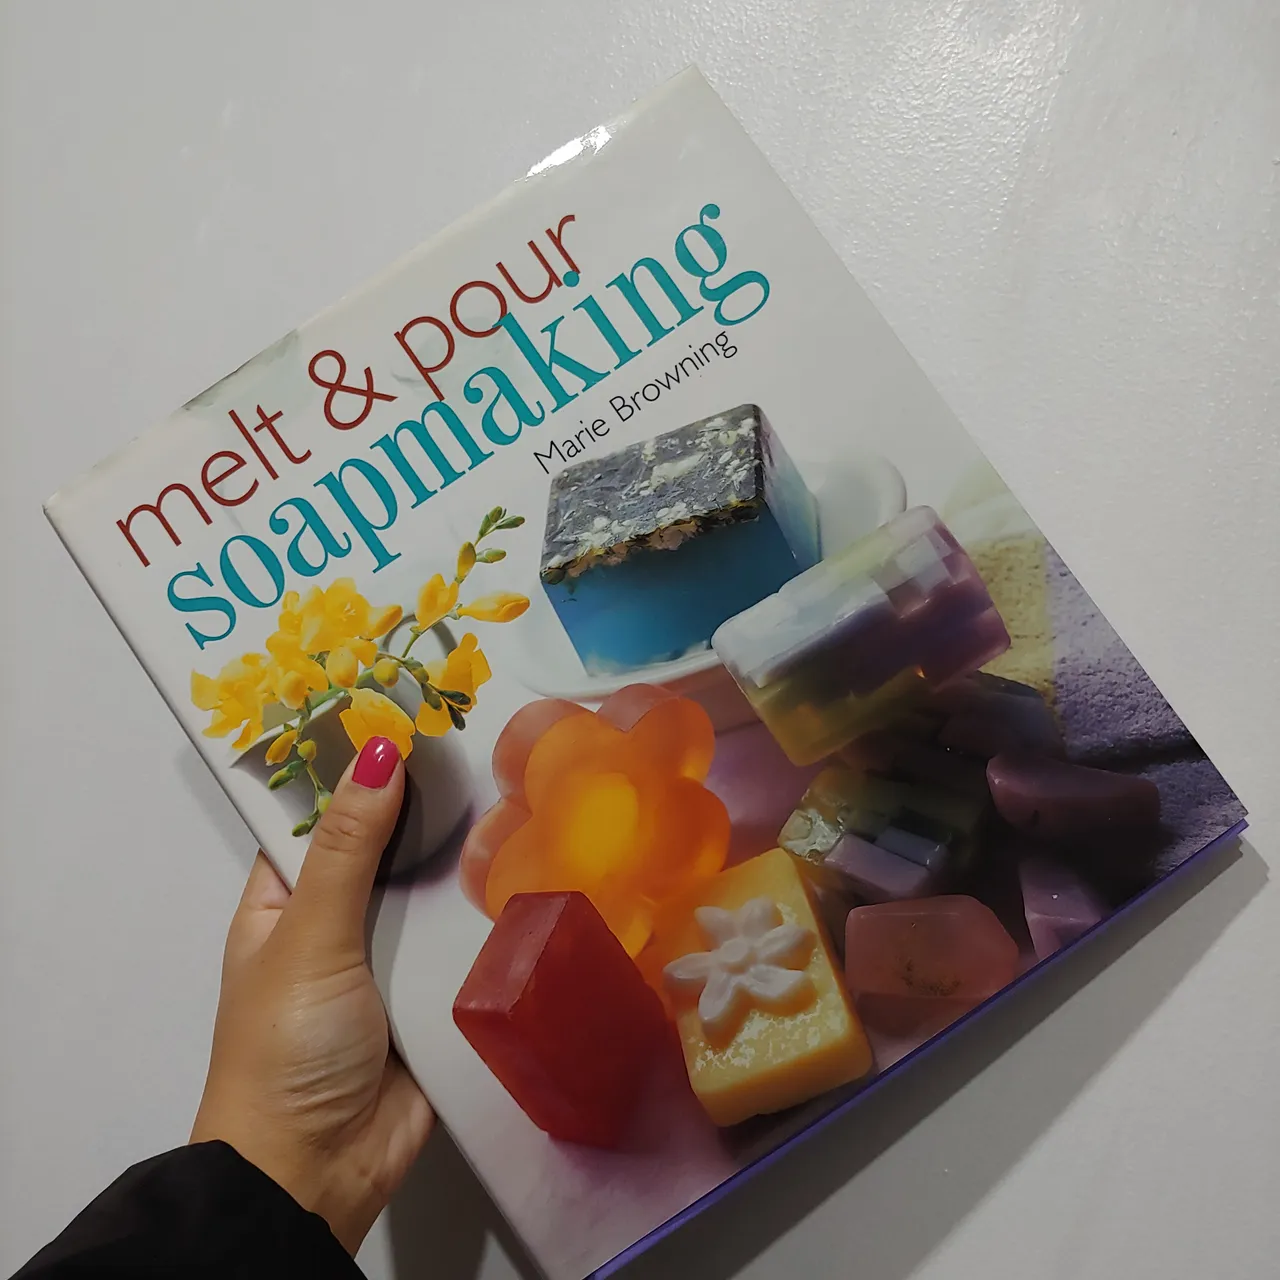 Soapmaking how-to book photo 1